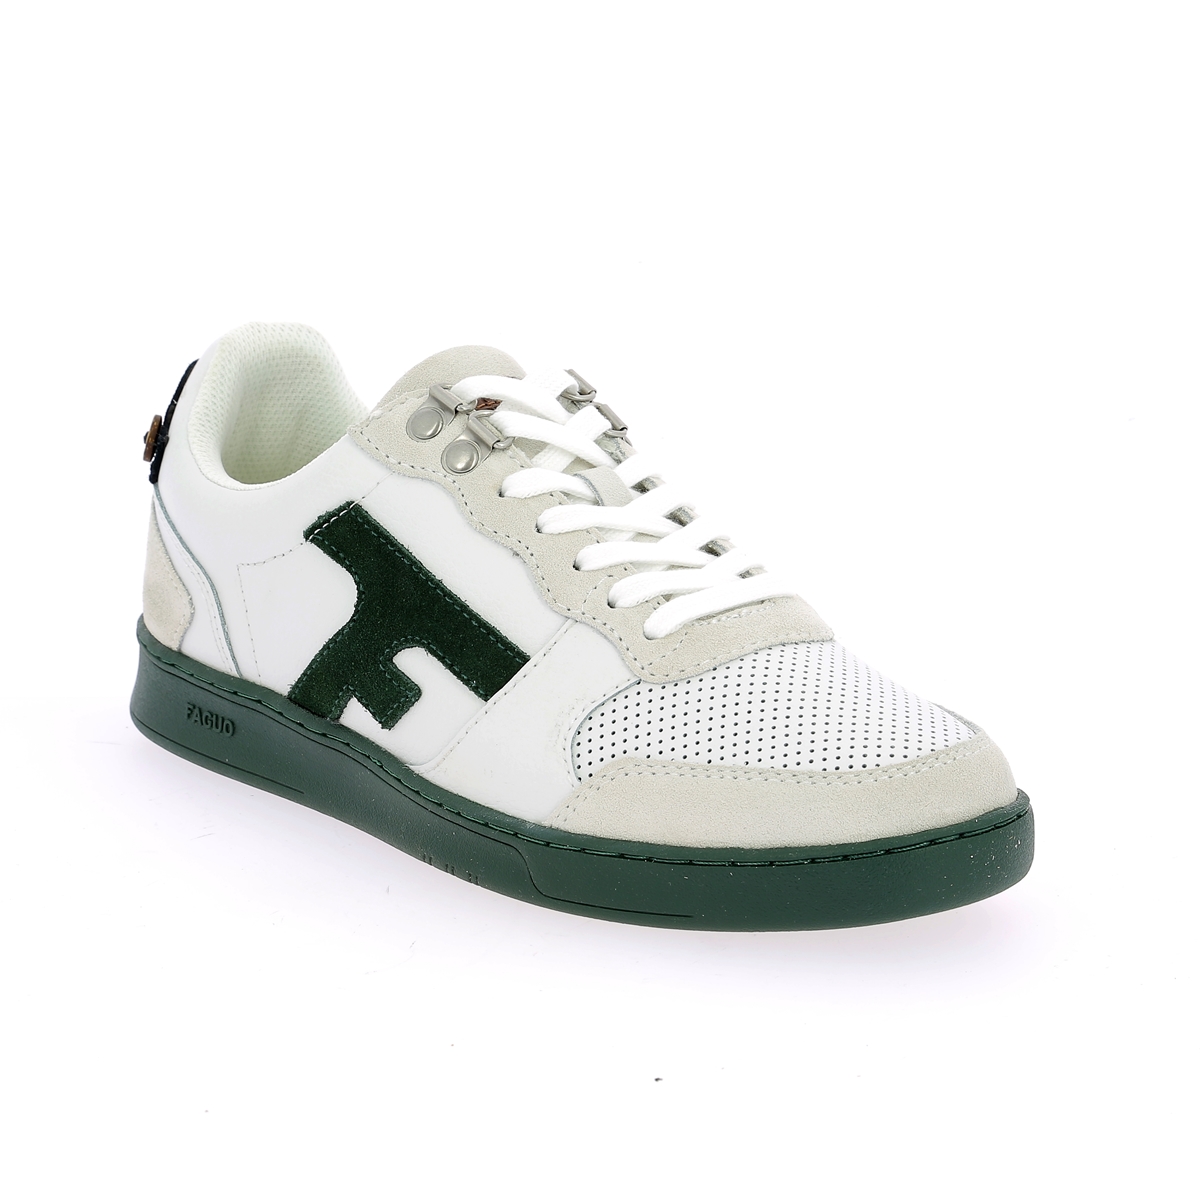 Faguo Sneakers wit